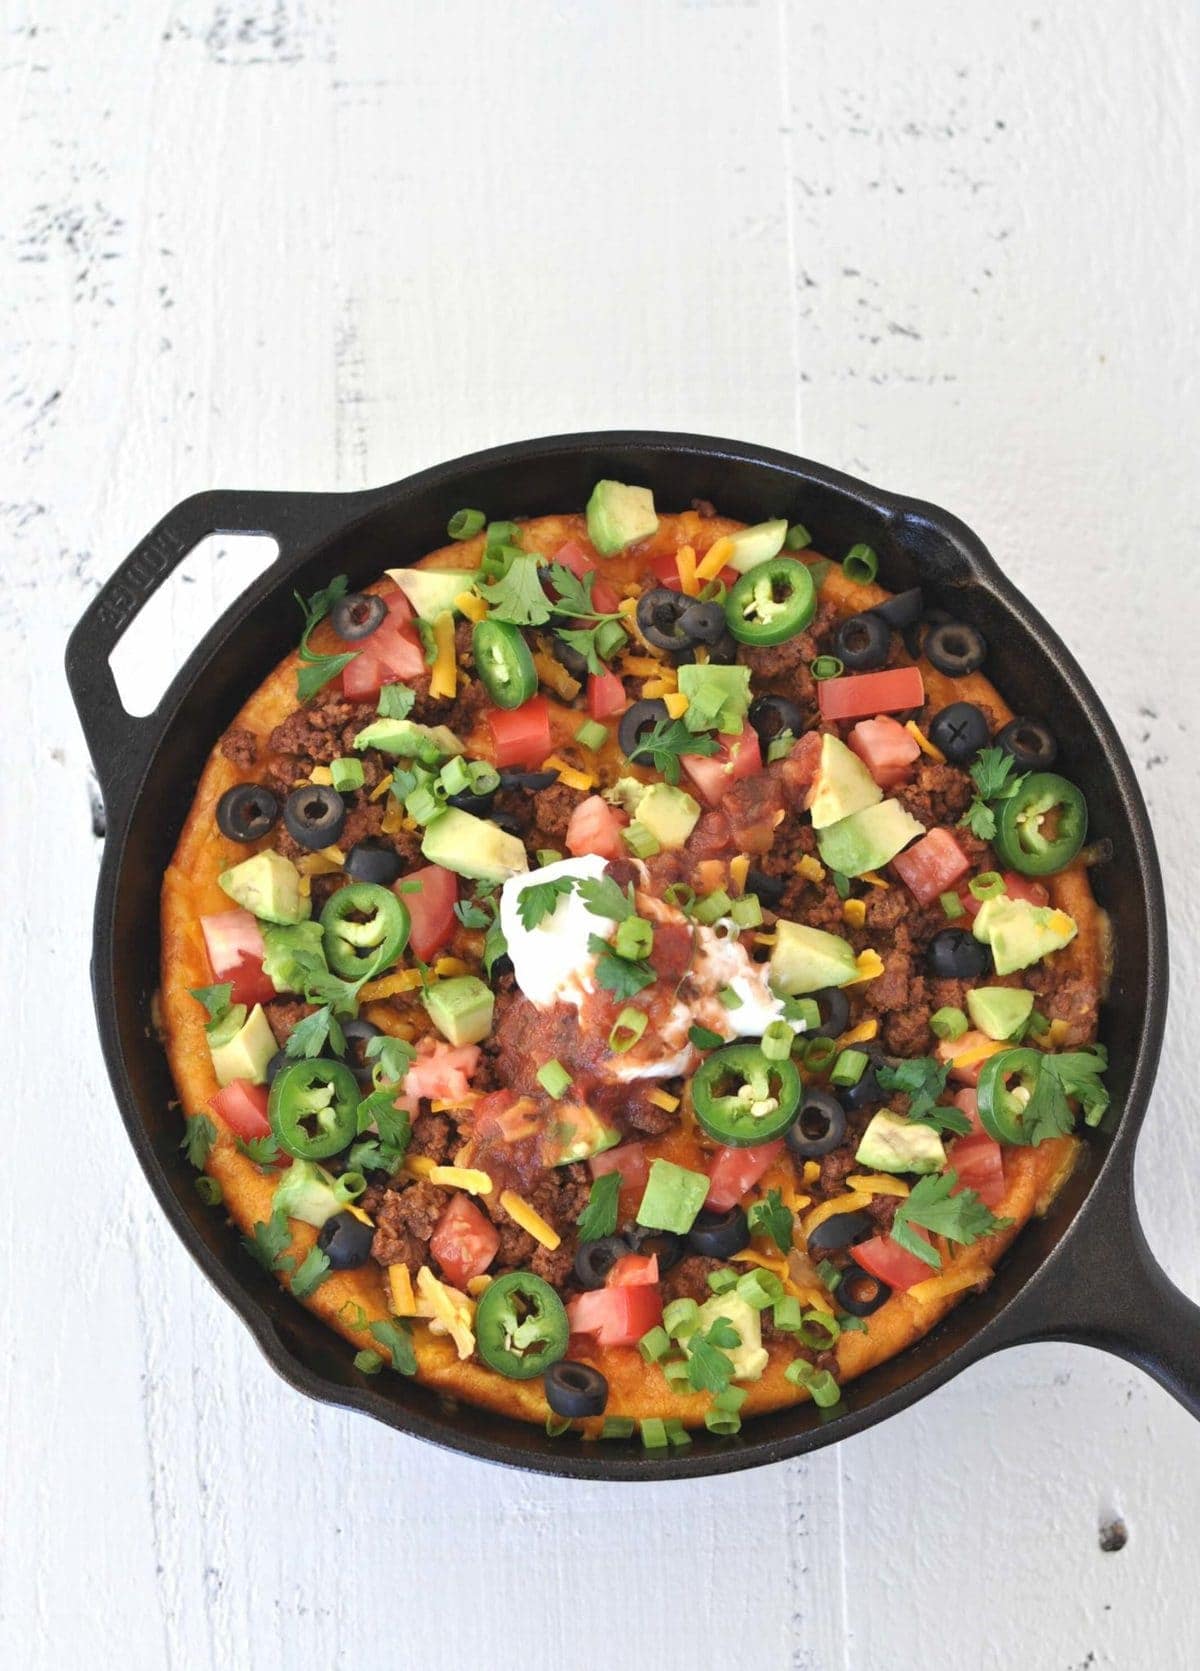 a cast iron skillet with a breakfast bake in it. Ingredients - eggs, beef, cheese, salsa, sour cream, avocado, olives.